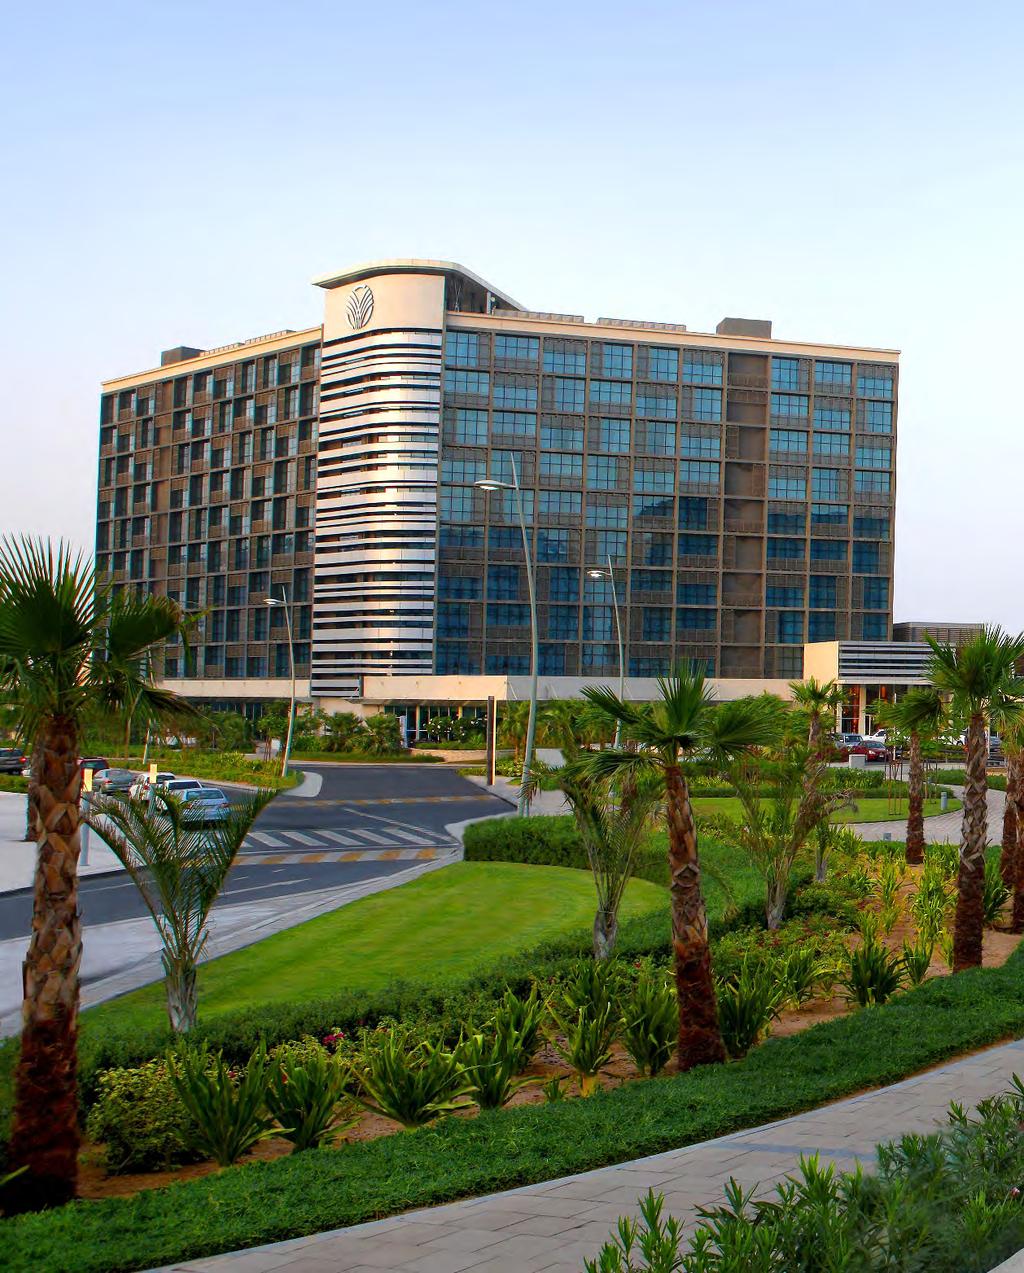 Yas Rotana ABU DHABI One of the best things about this four-star hotel is its superb location that is just minutes away from the local attractions most guests have on their Abu Dhabi bucket list: the